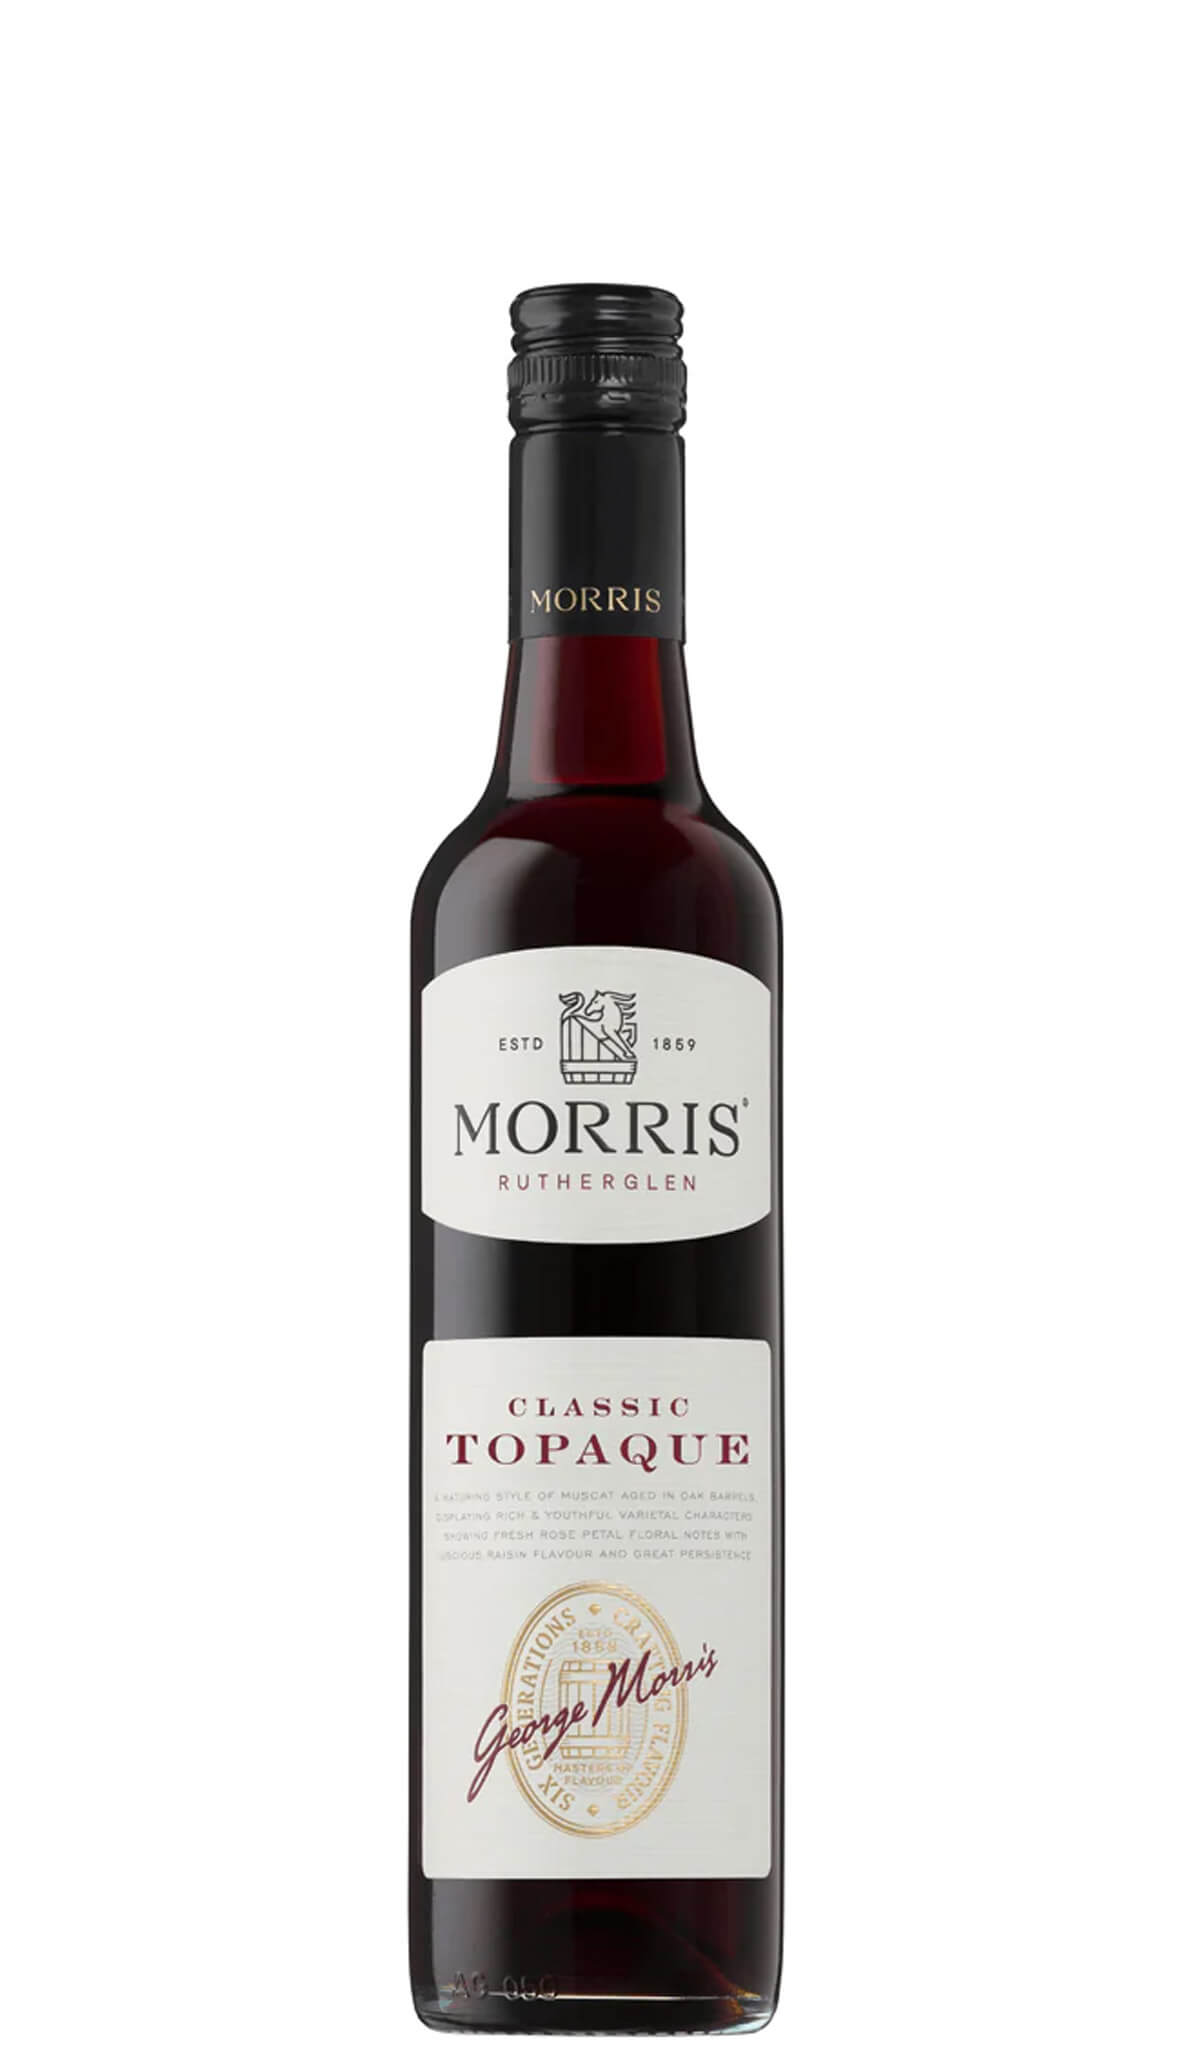 Find out more or buy Morris of Rutherglen Classic Liqueur Topaque 500ml online at Wine Sellers Direct - Australia’s independent liquor specialists.